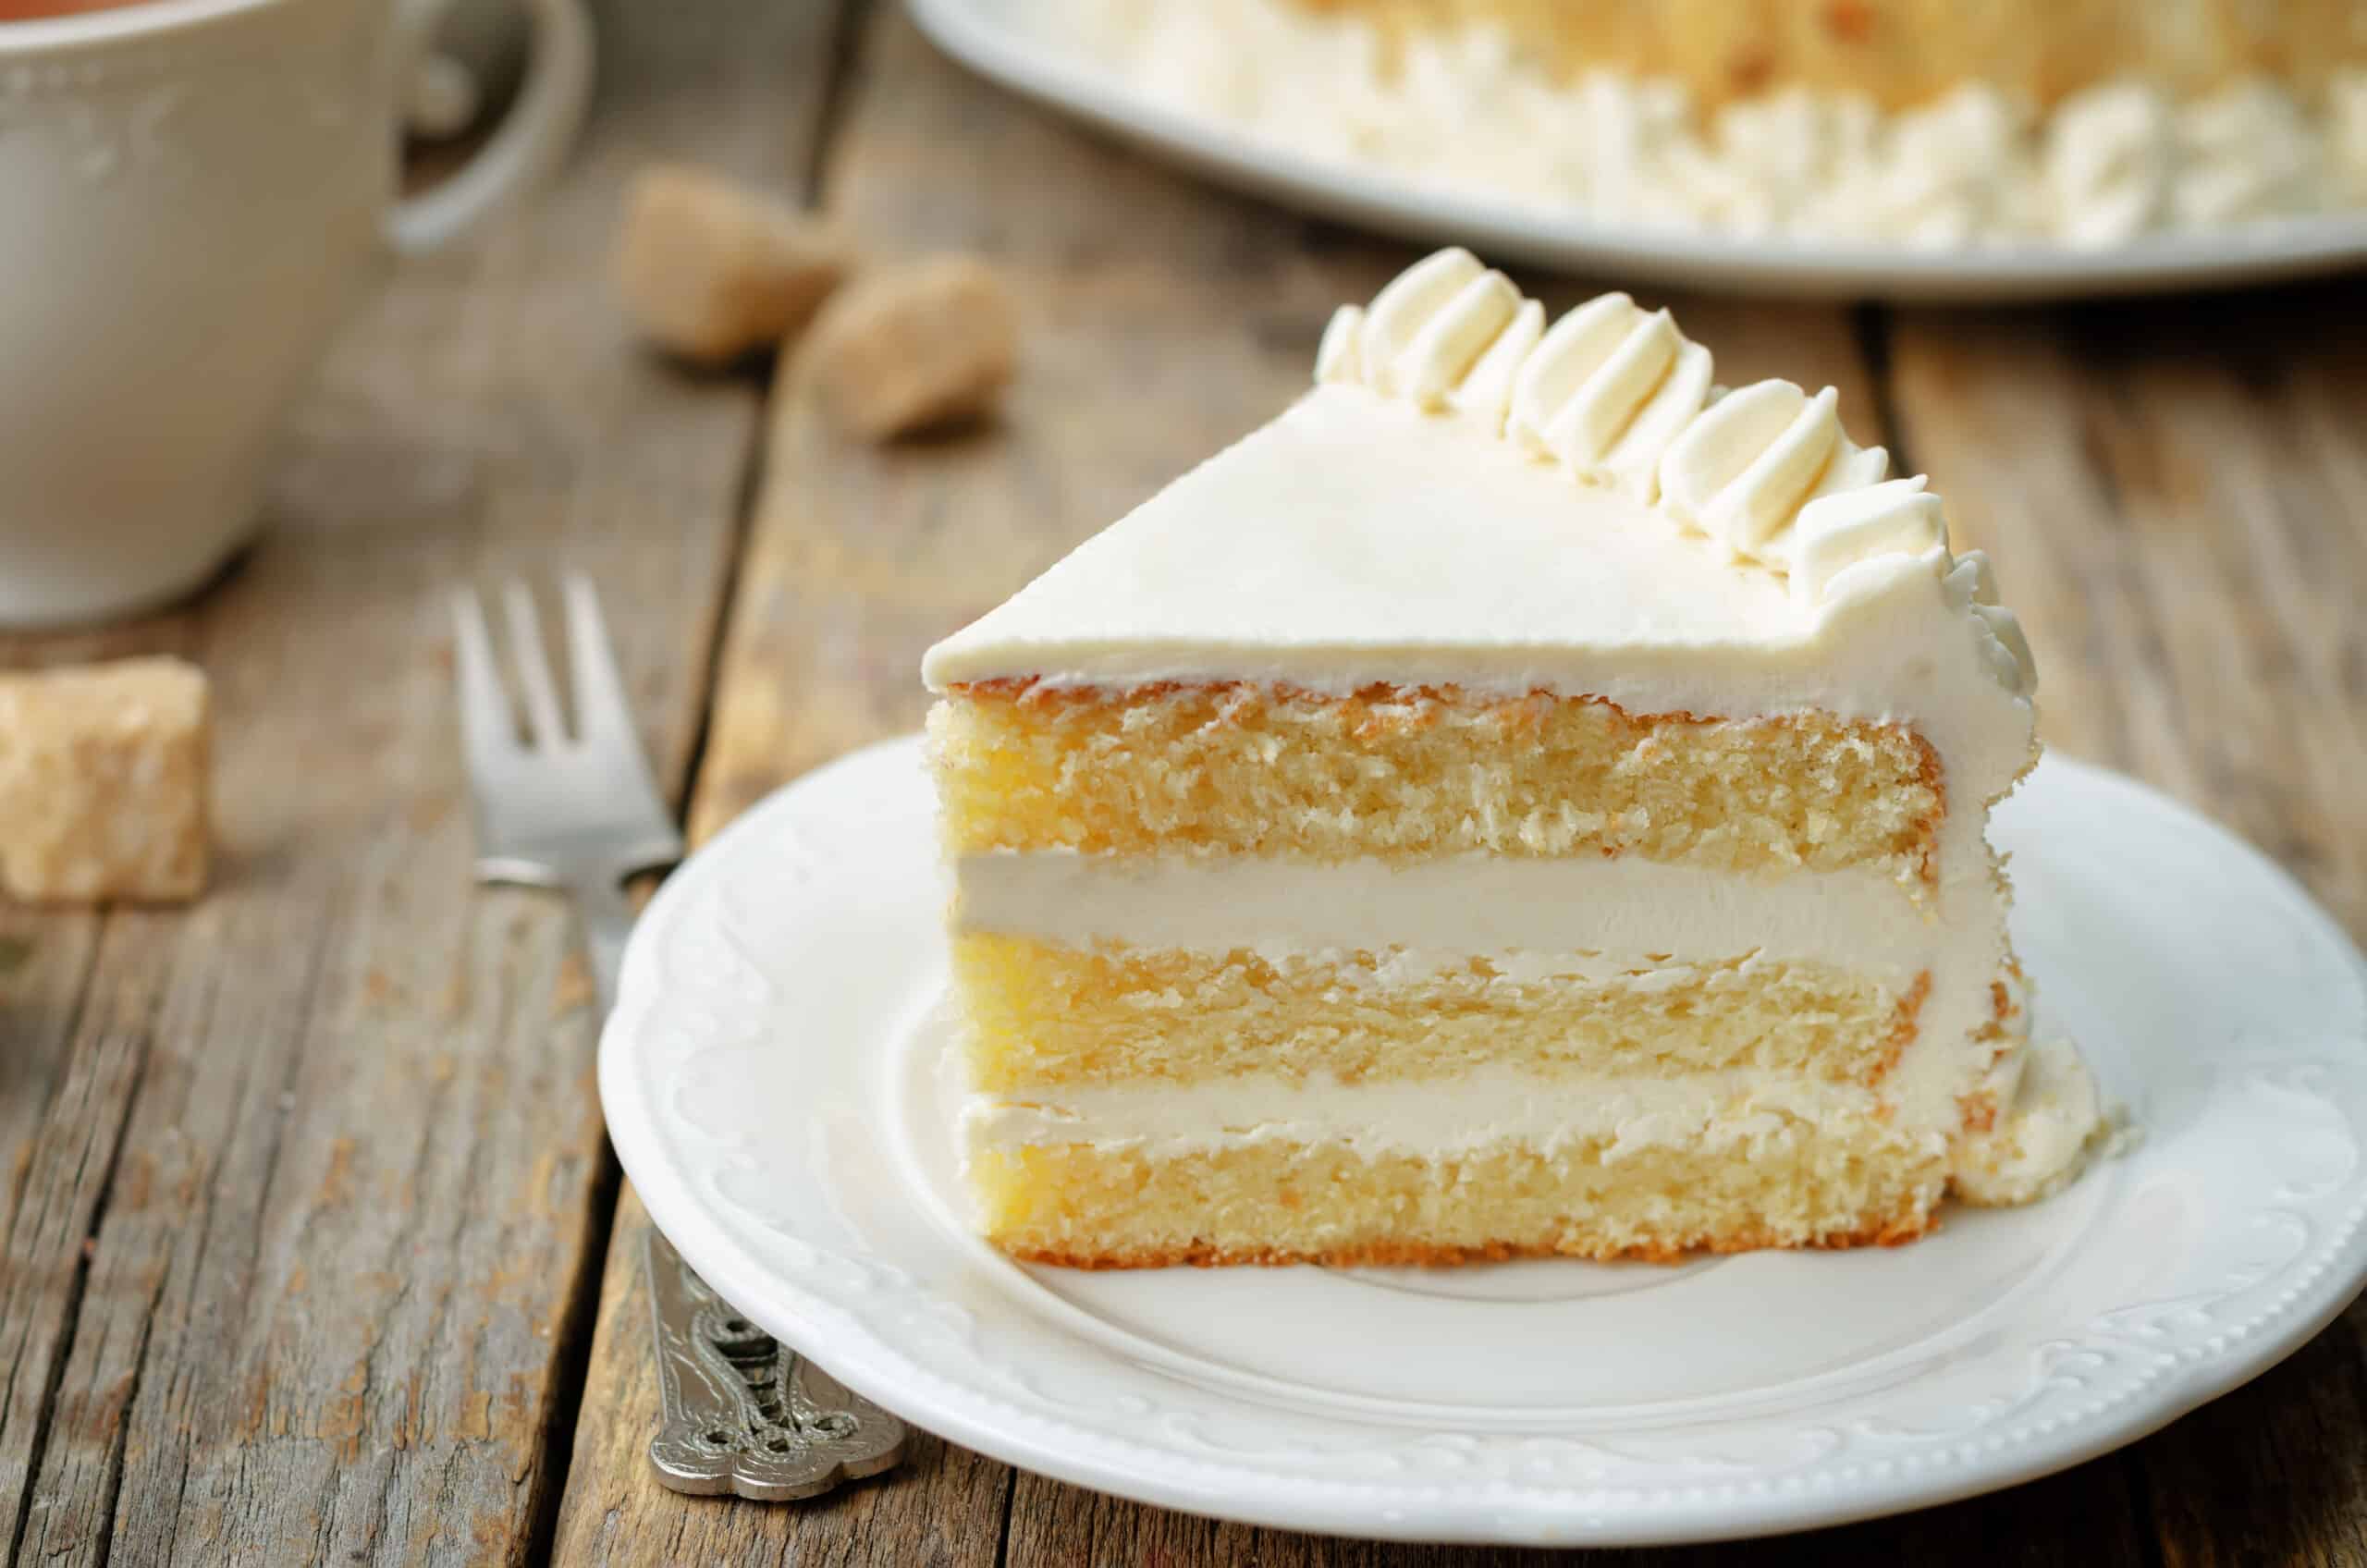 Slice of three-layered sponge cake with buttercream icing on a small white plate with dainty fork on the left, photographed on a rustic wooden table